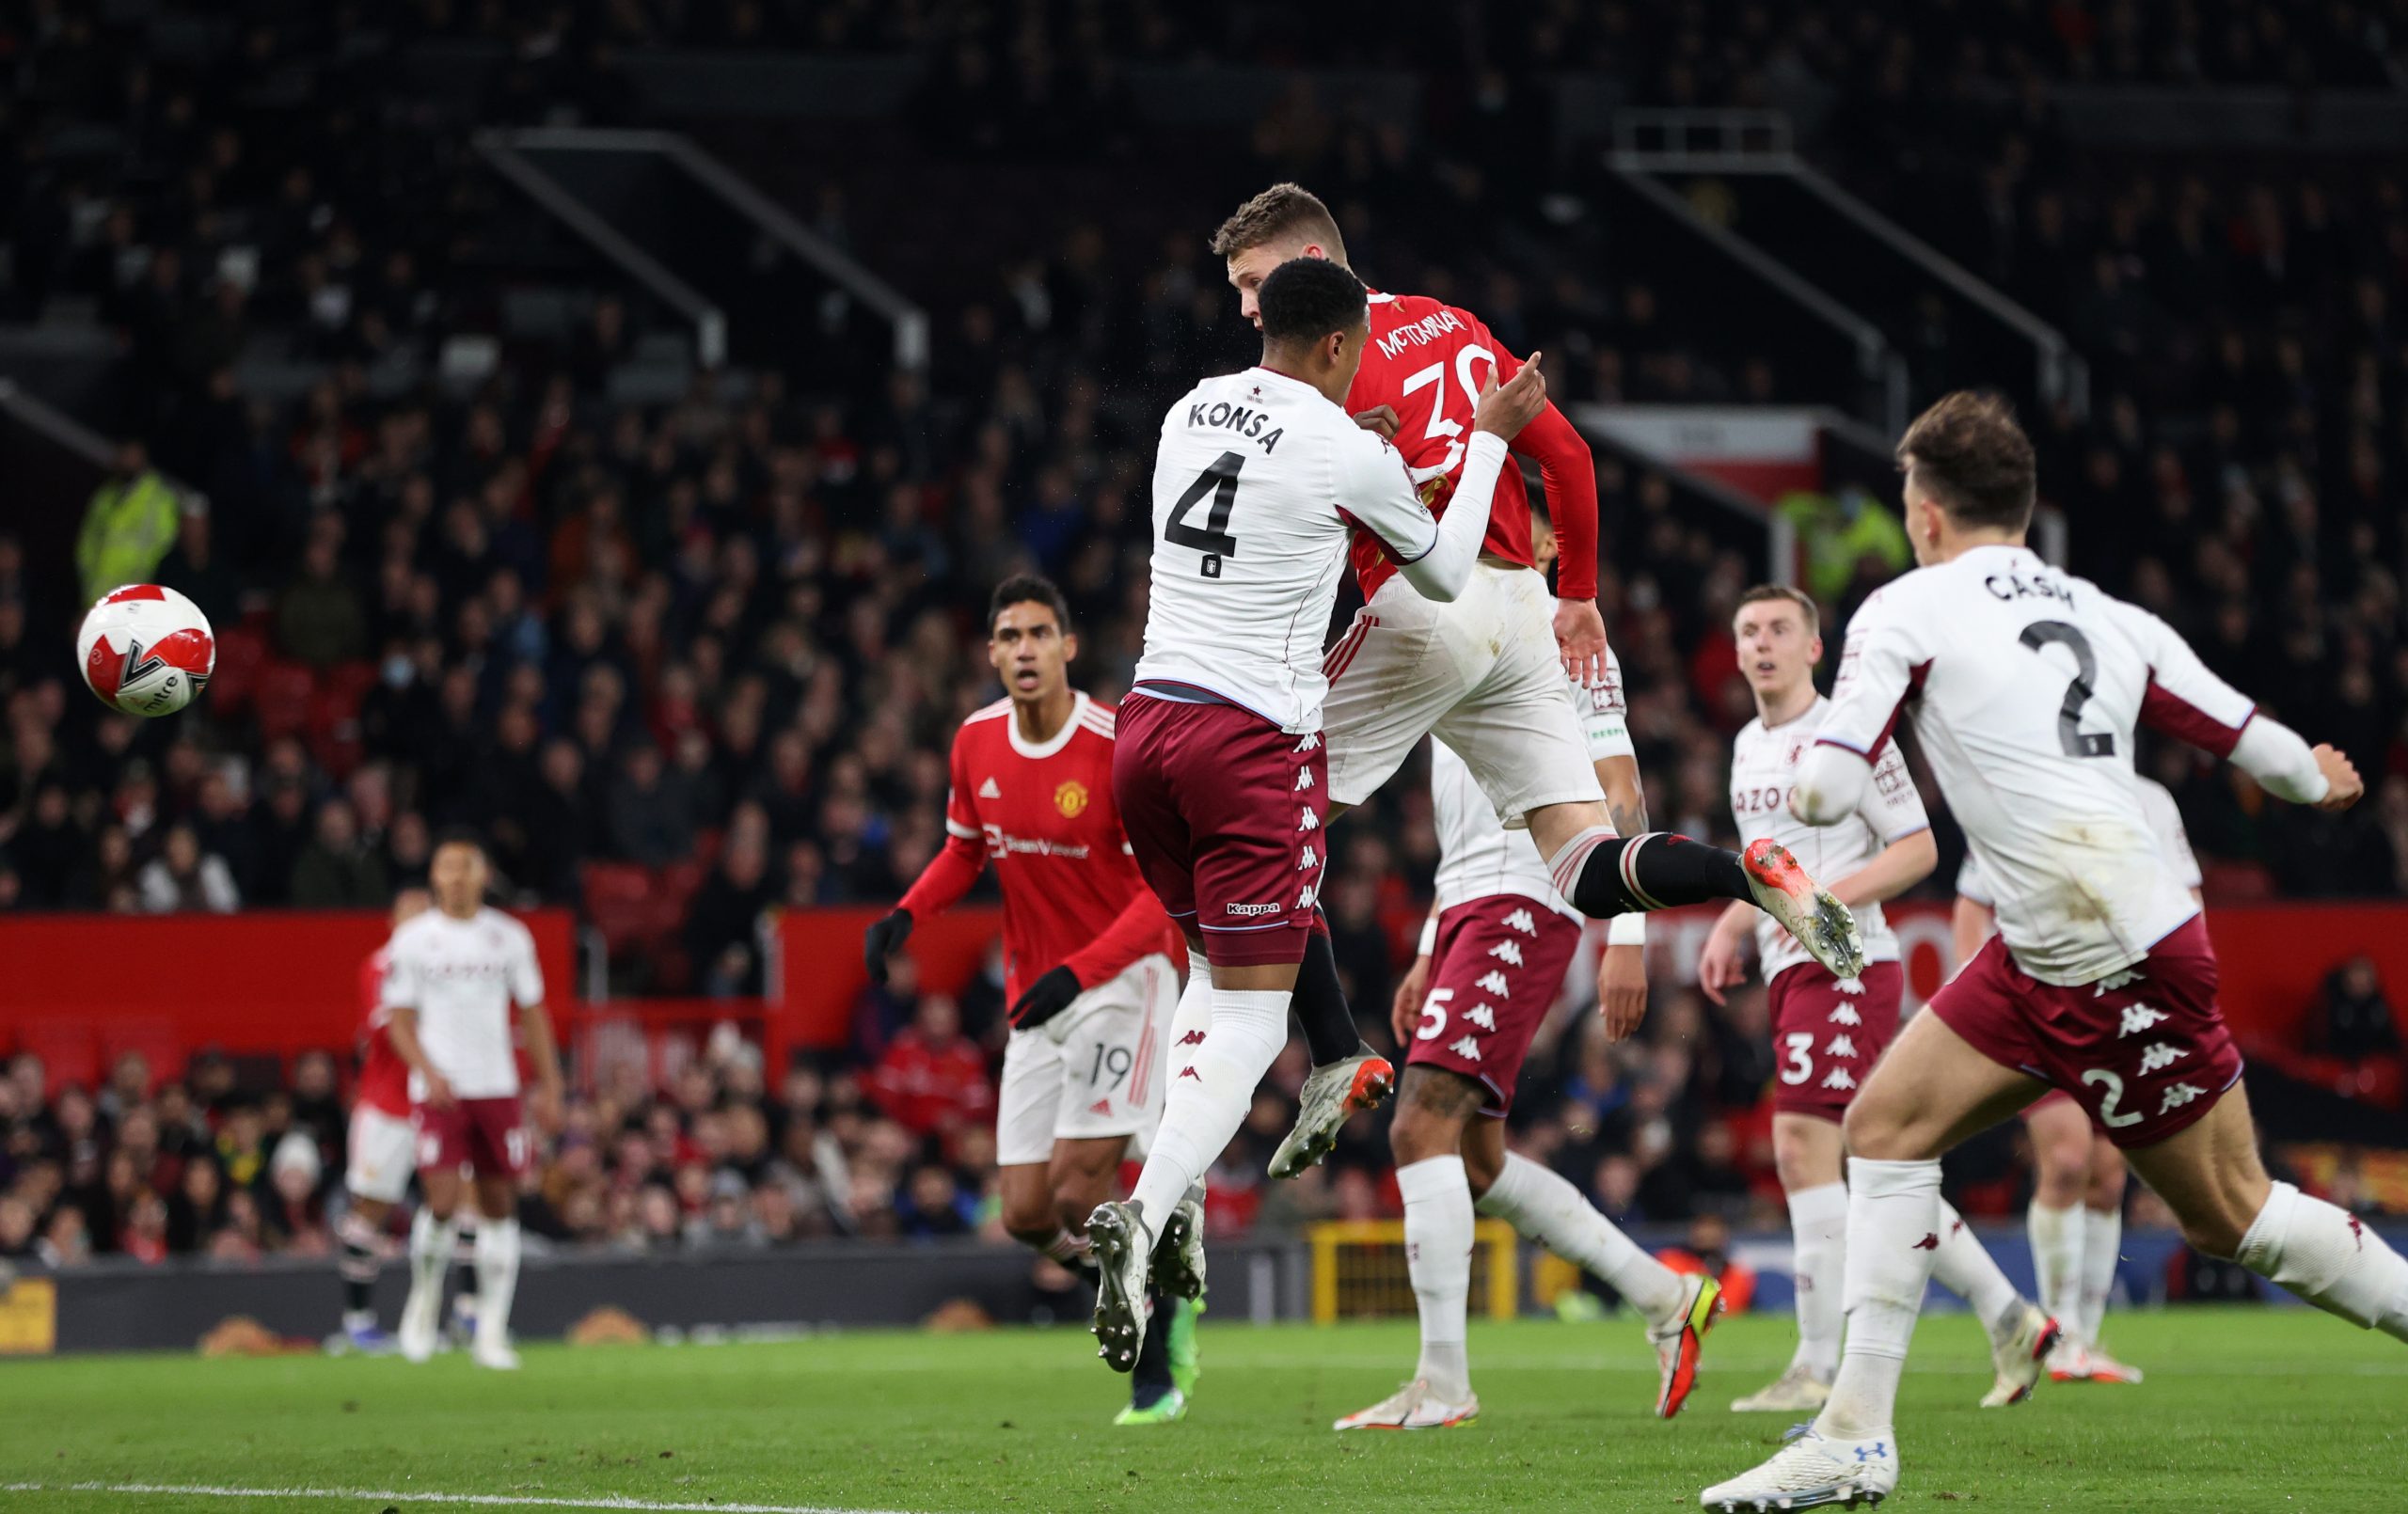 Scott McTominay scored the winner against Aston Villa in the FA Cup.